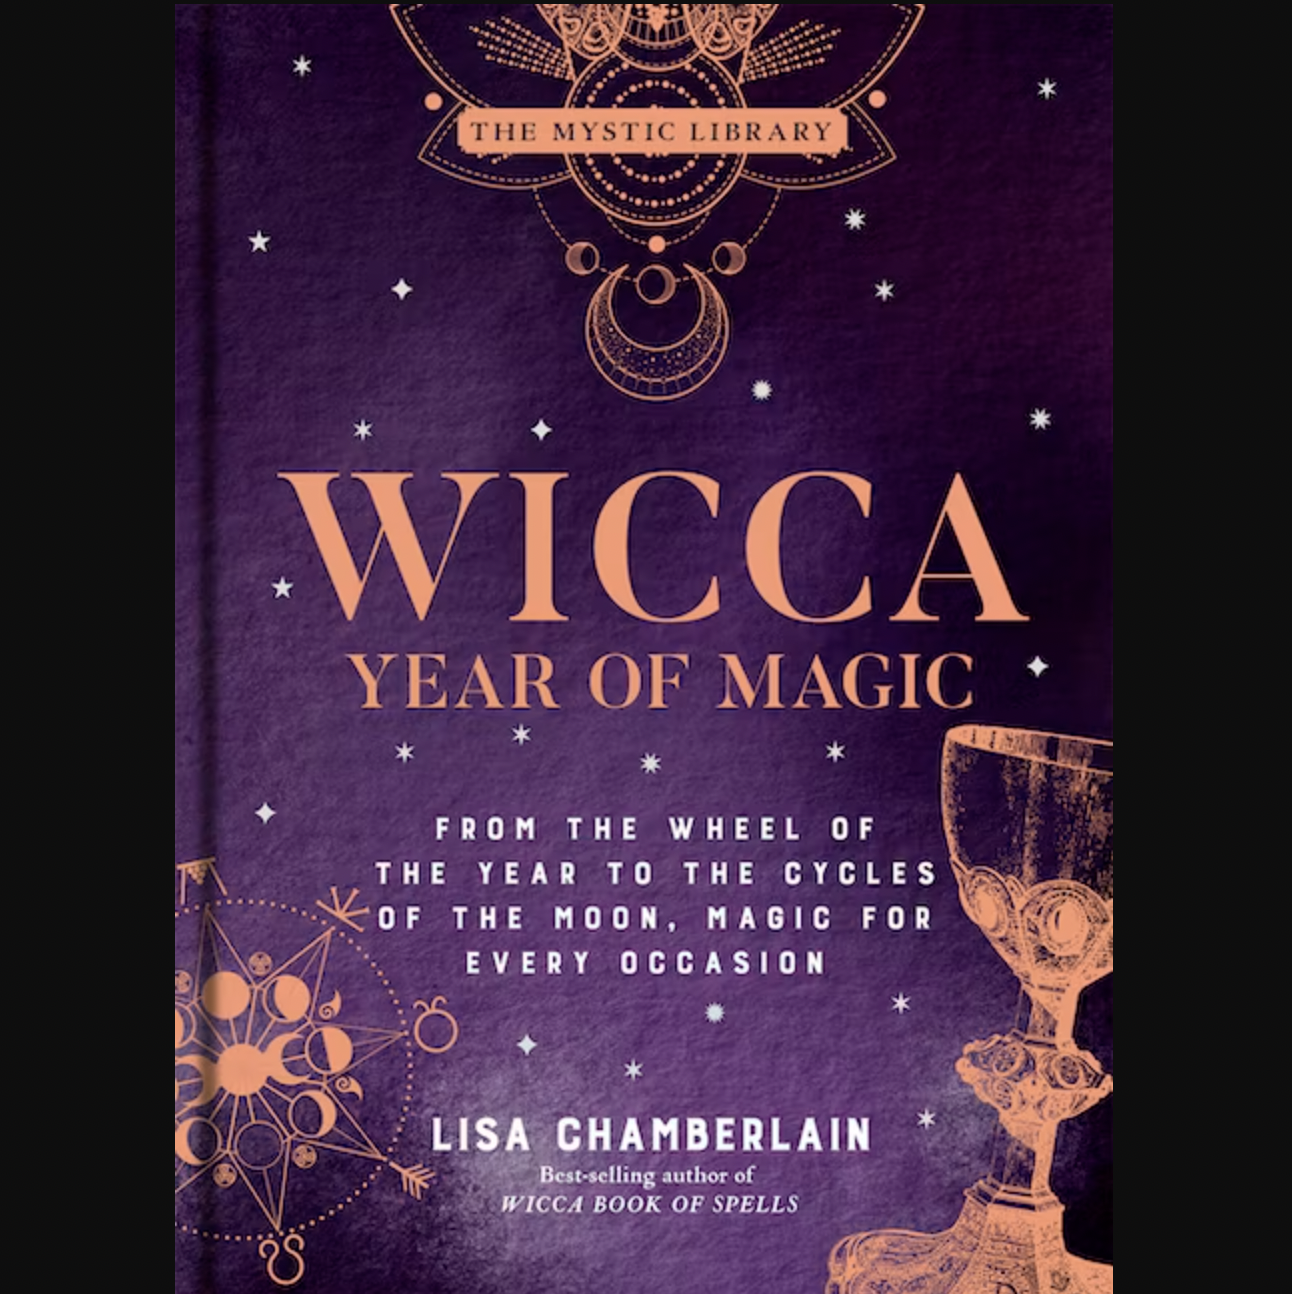 Wicca Year of Magic: From the Wheel of the Year to the Cycles of the Moon Magic for Every Occasion By Lisa Chamberlain